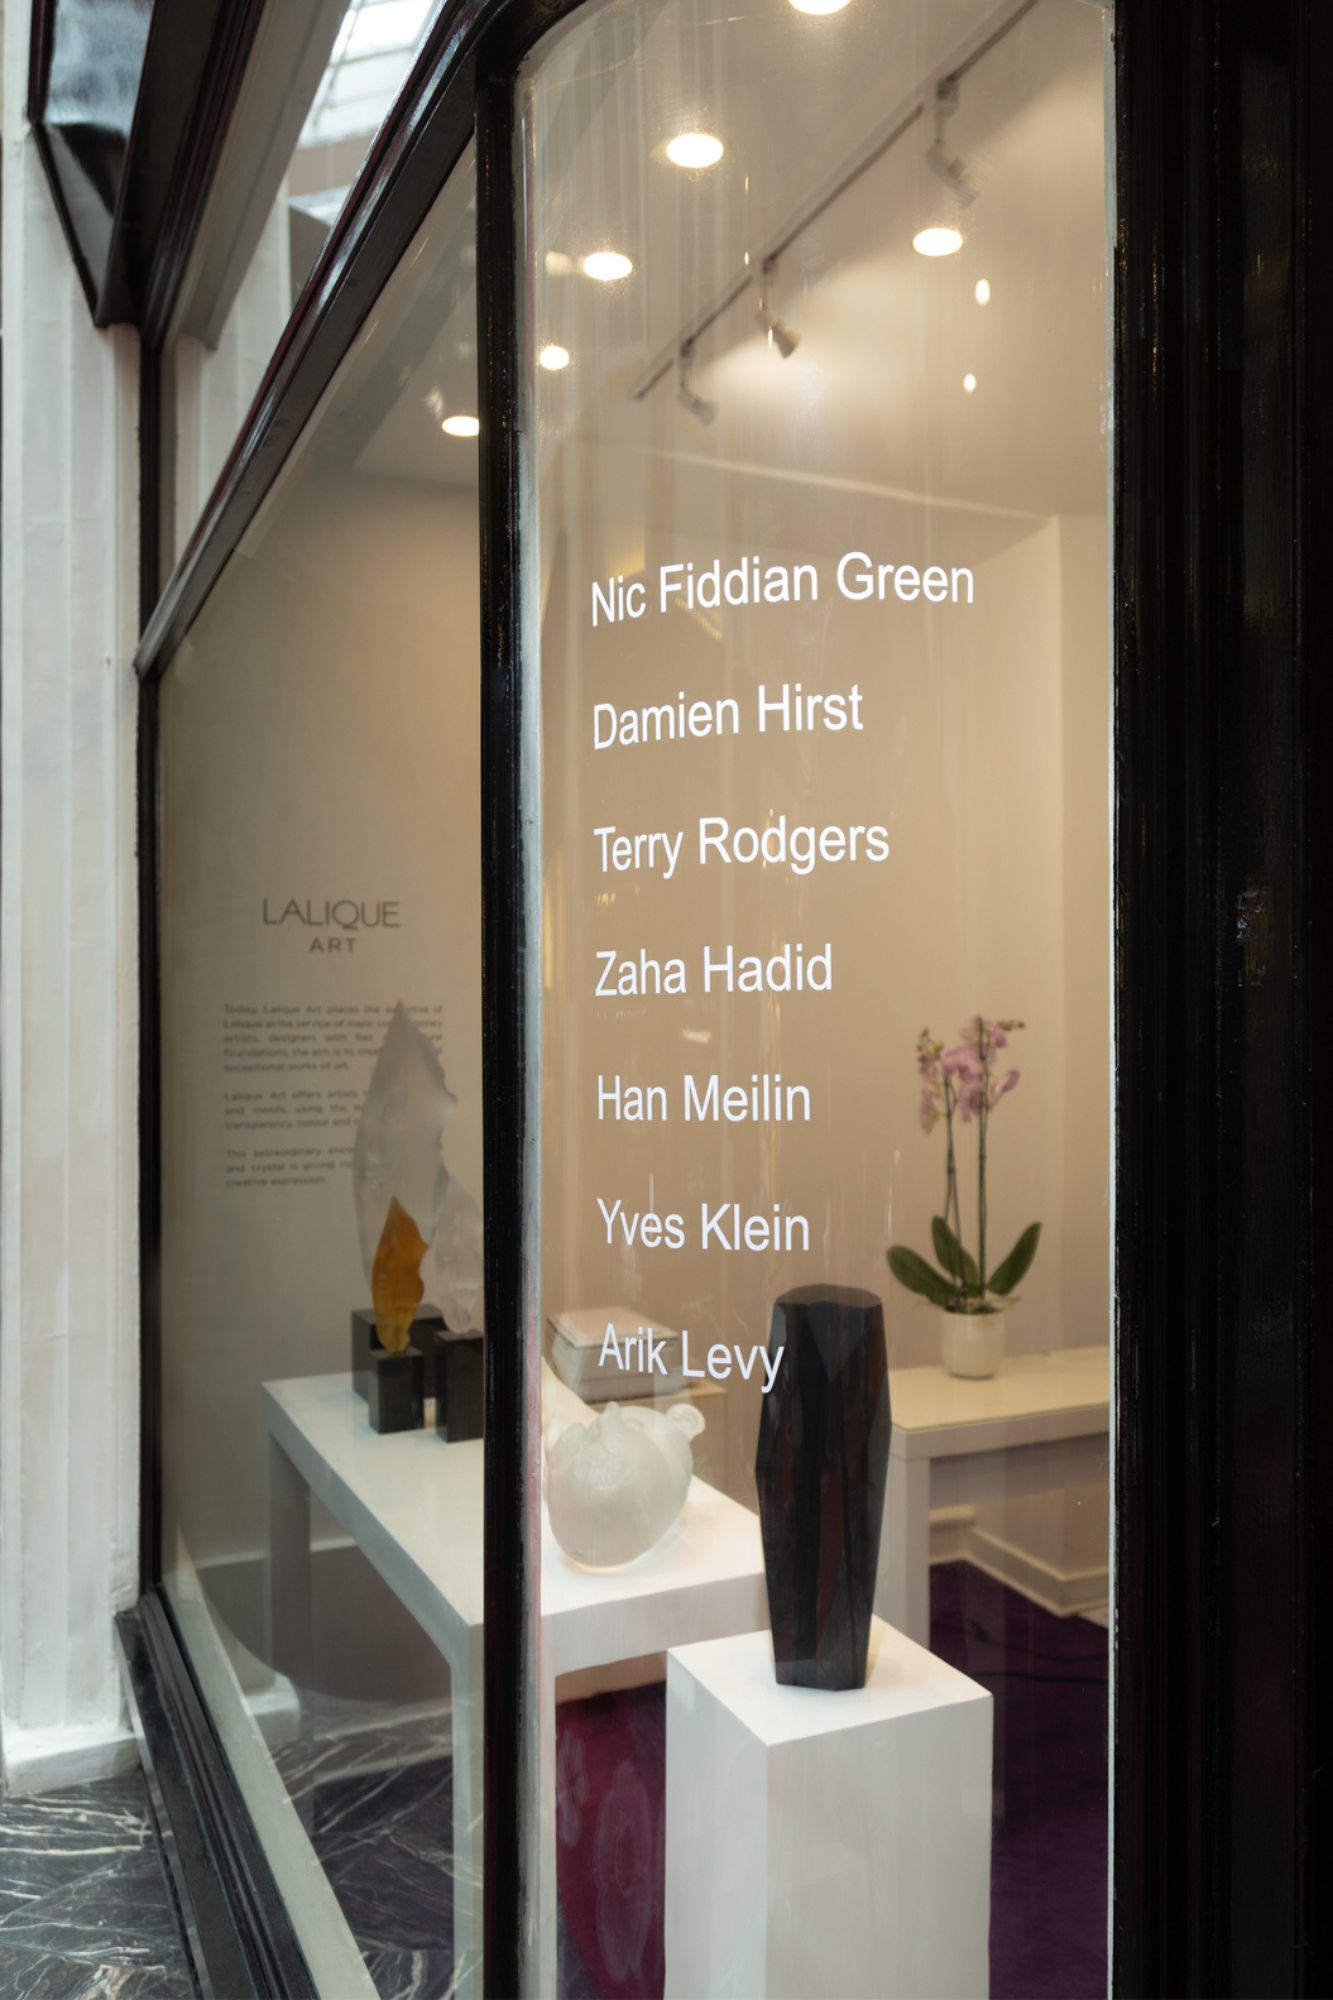 art gallery, Lalique to Open its First Art Gallery in the World in London’s Burlington Arcade